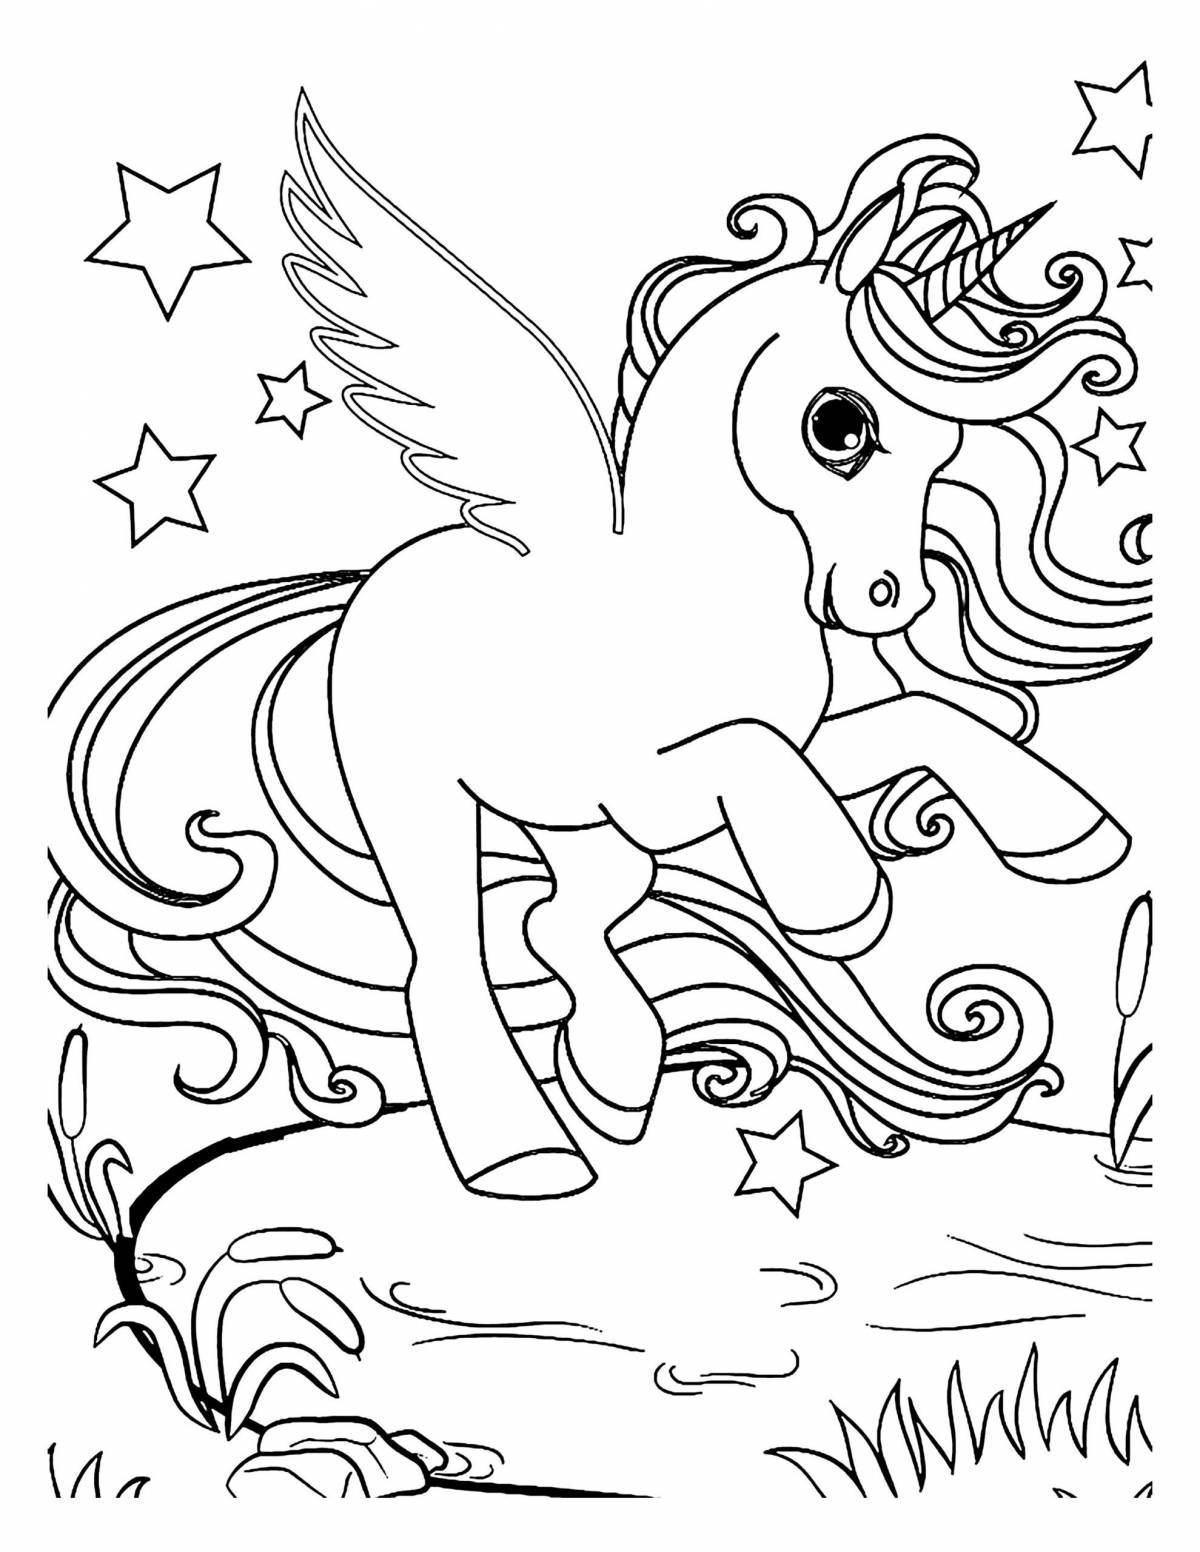 Unicorn for children 4 5 years old #3